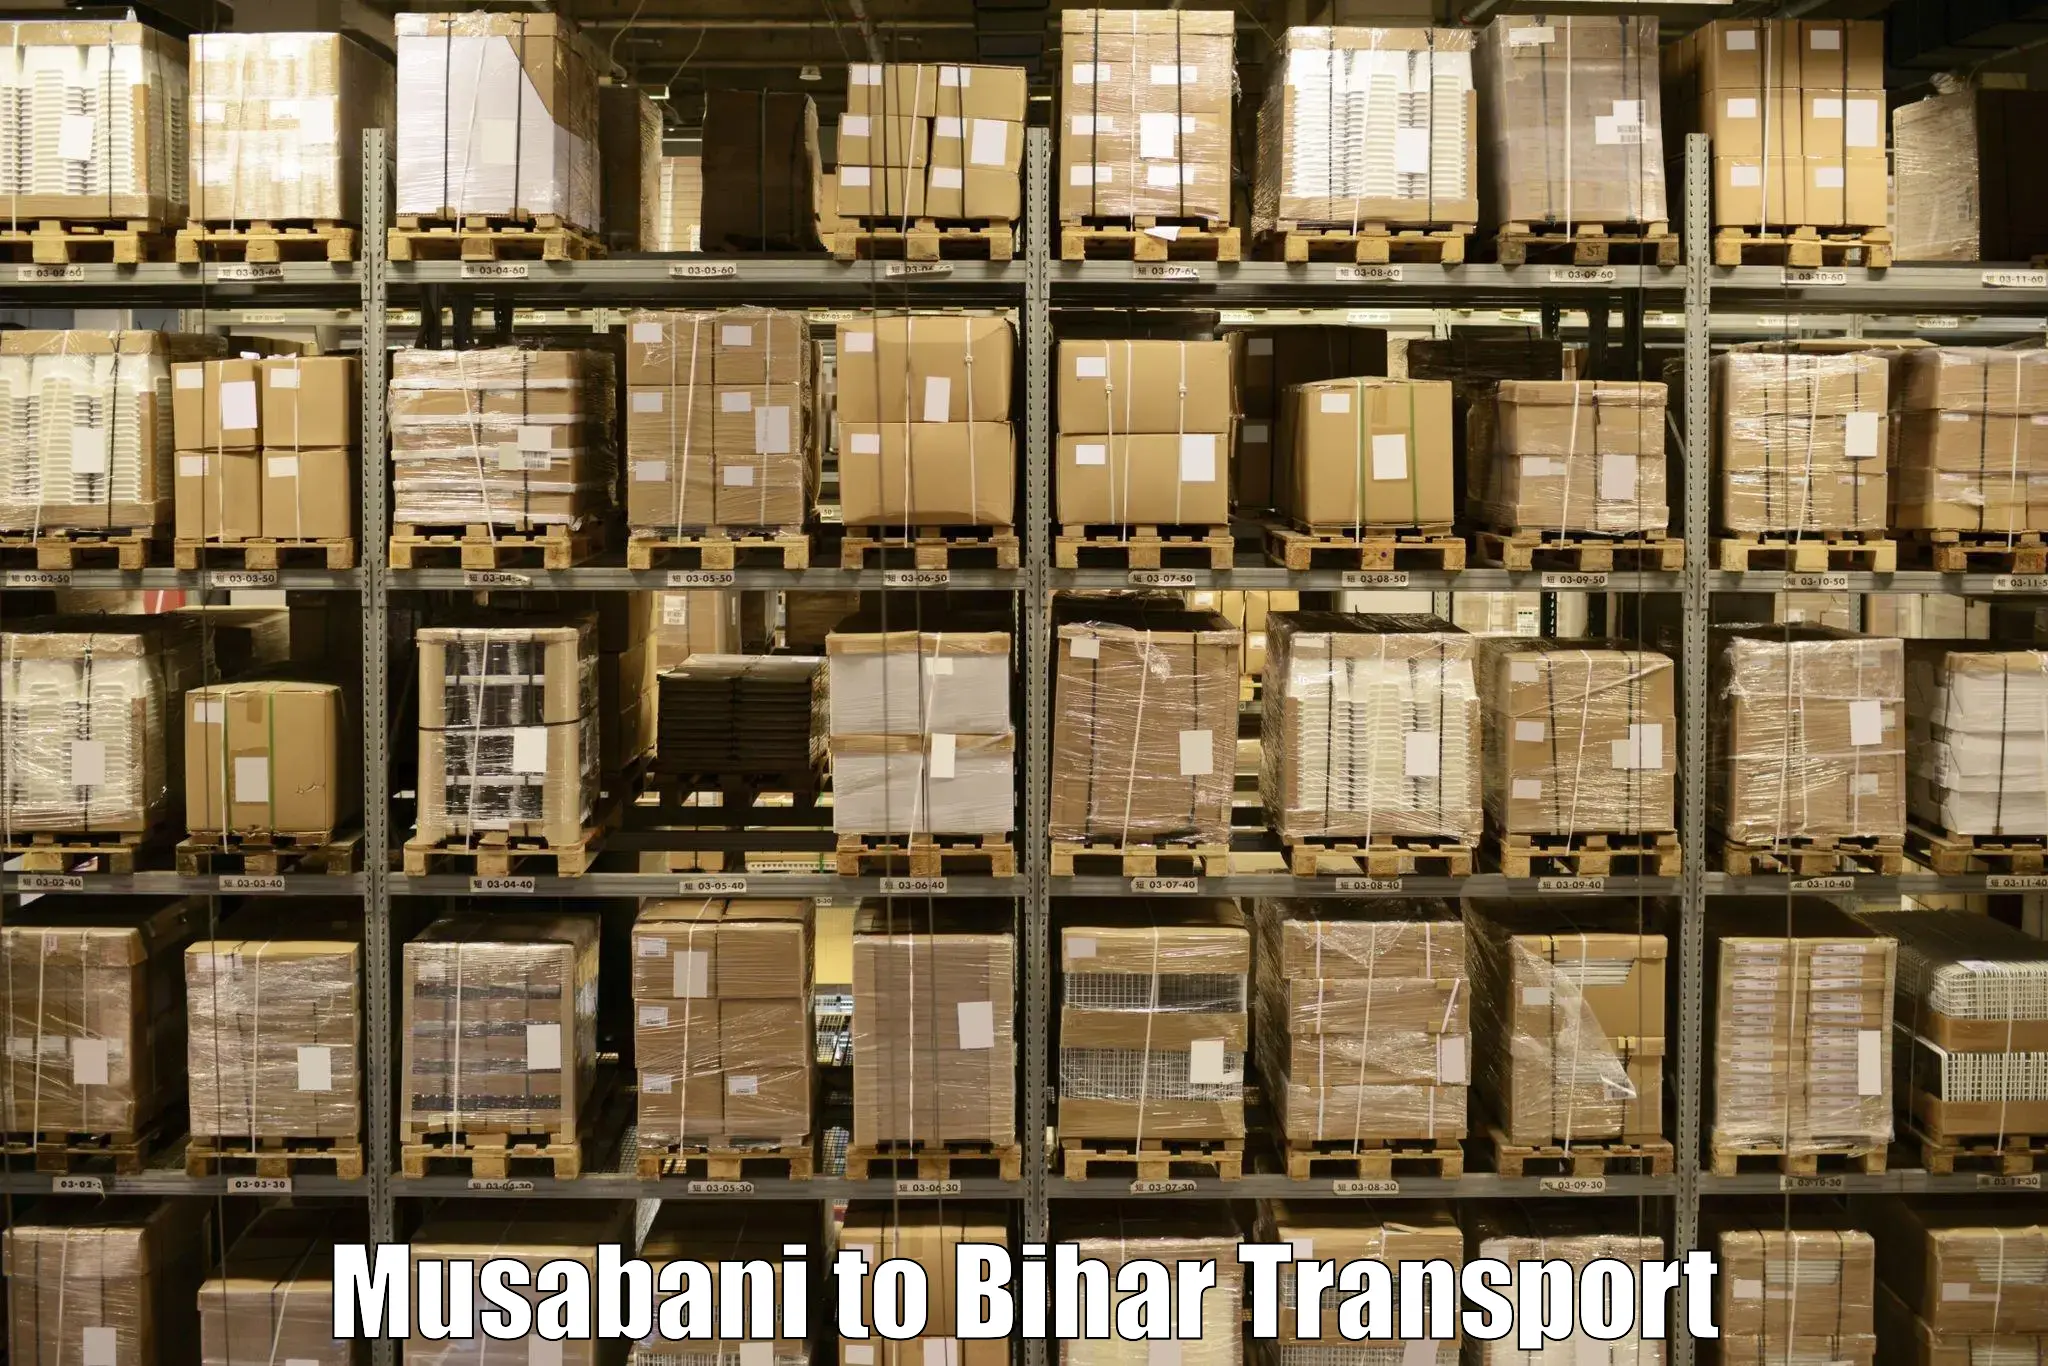 Nearby transport service Musabani to Chainpur